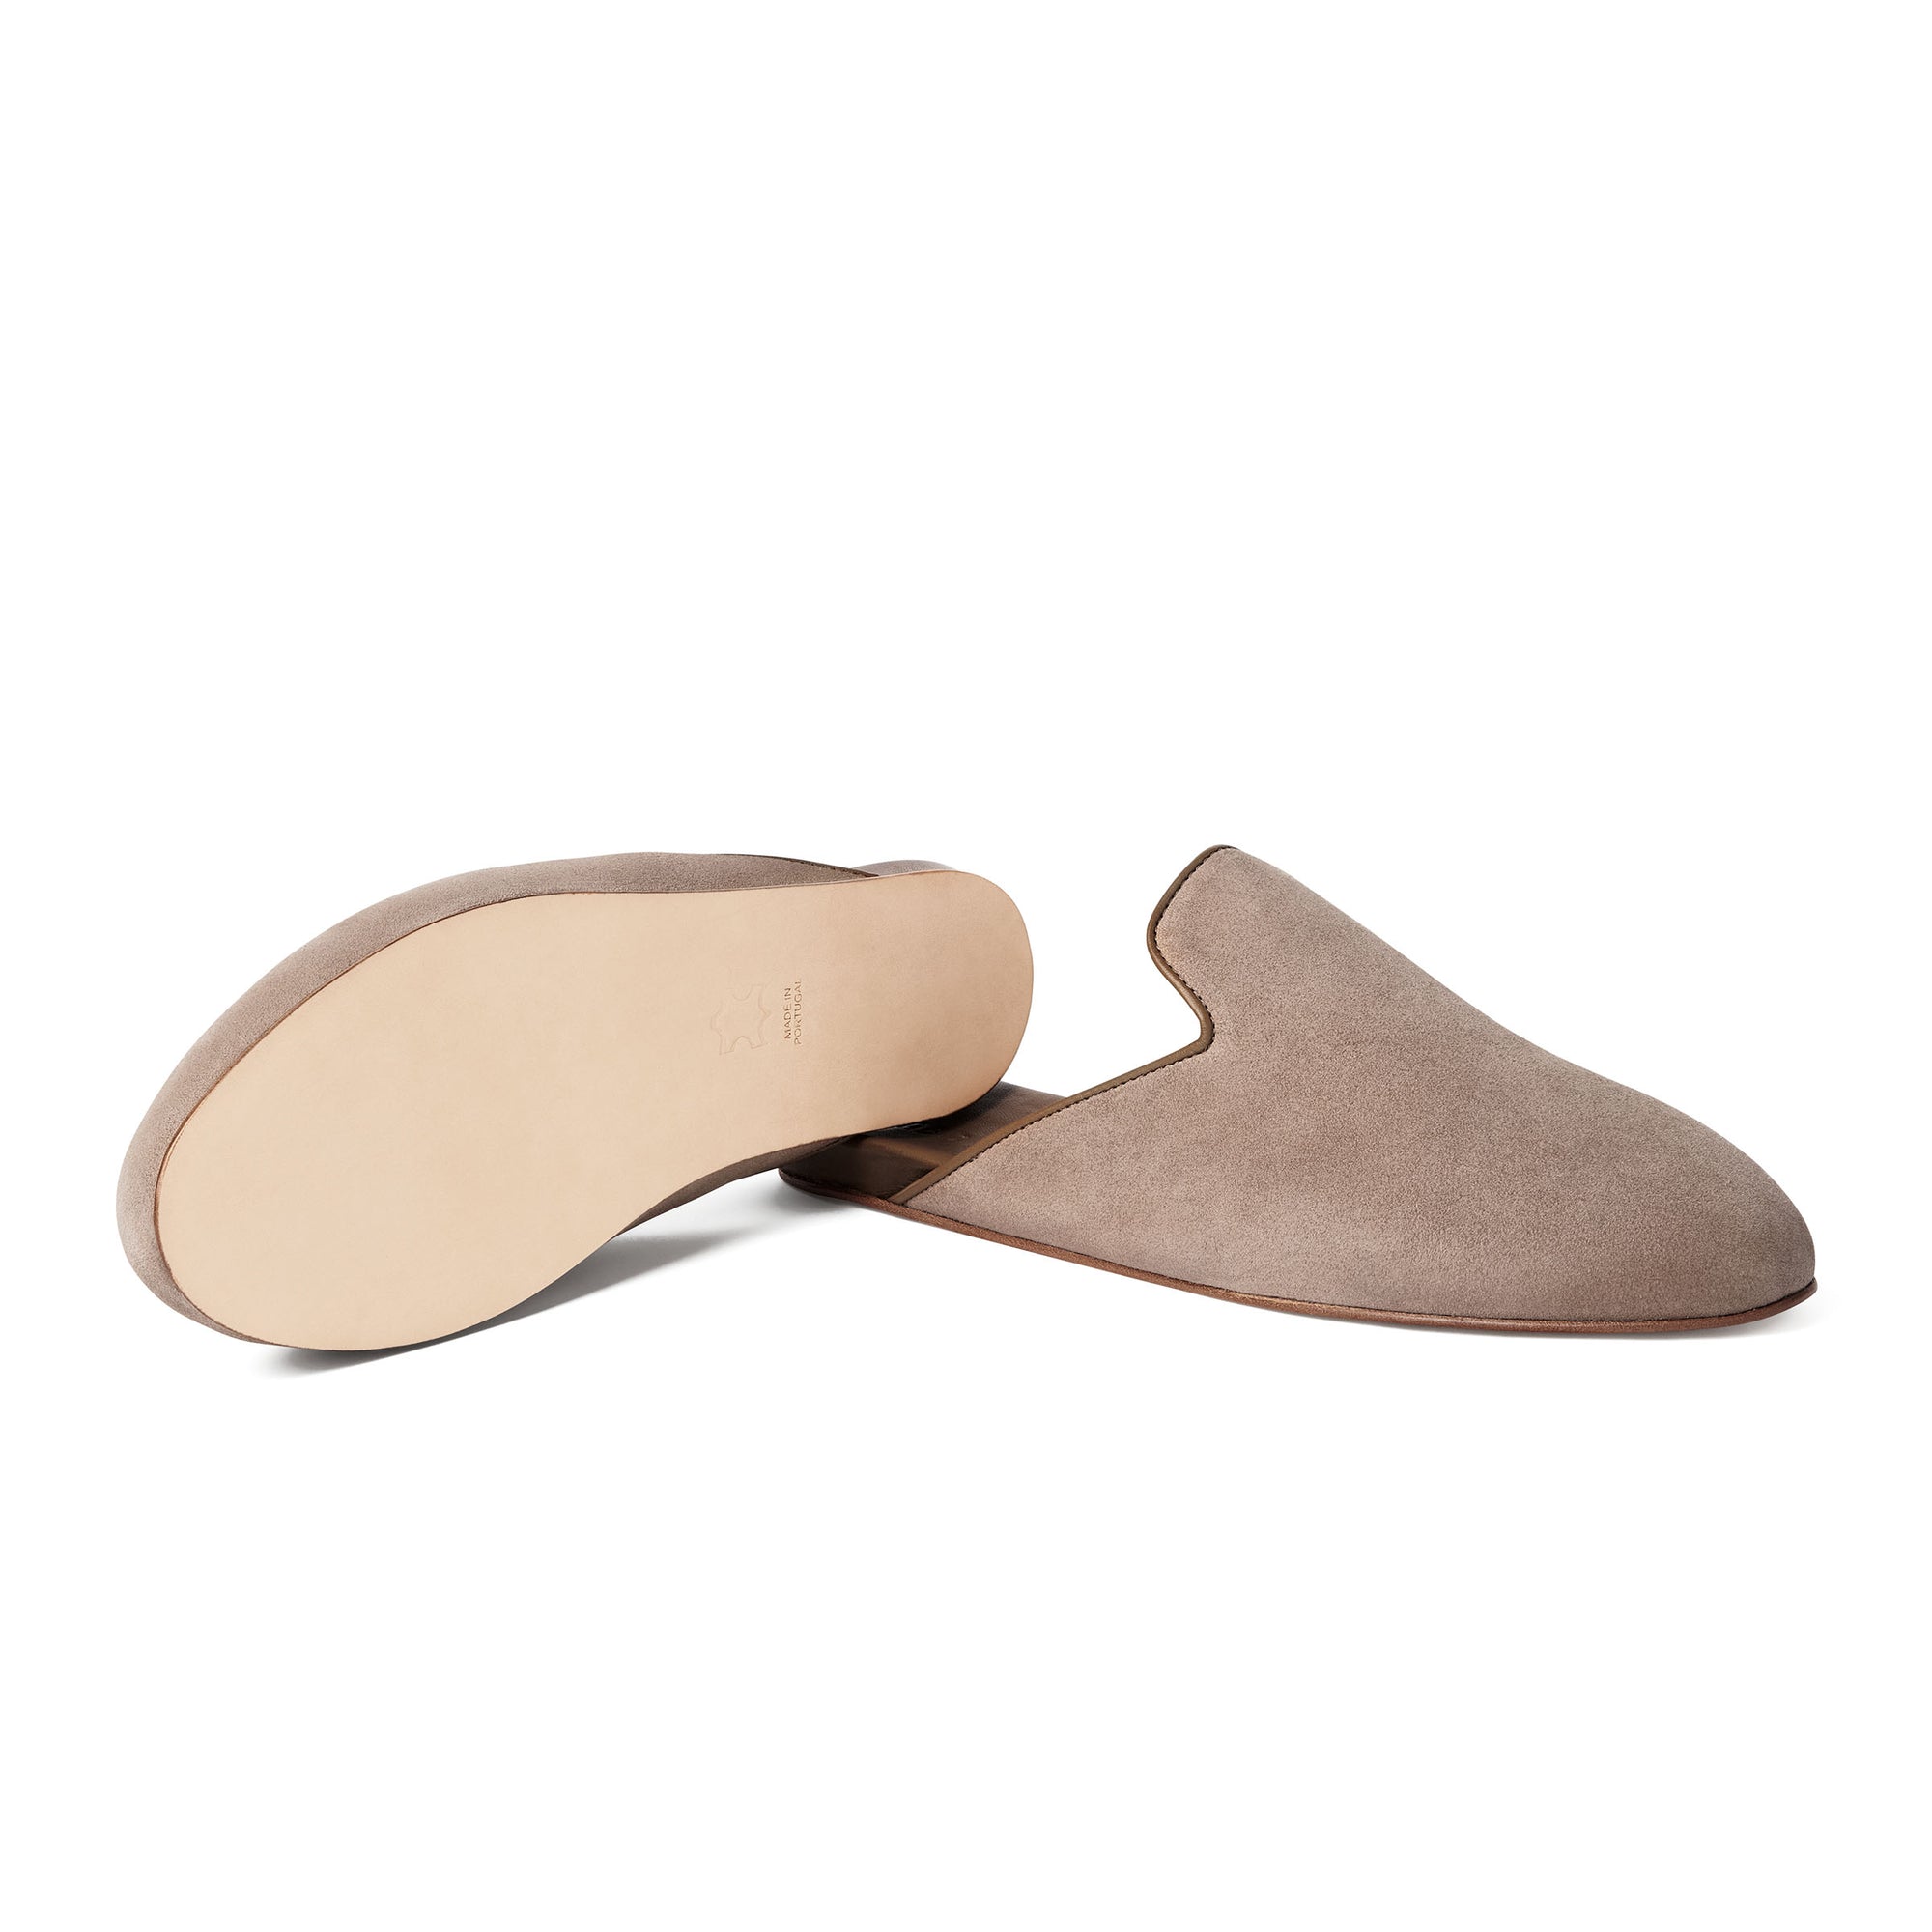 Inabo Men's Fritz Slipper in taupe suede showing leather outer sole